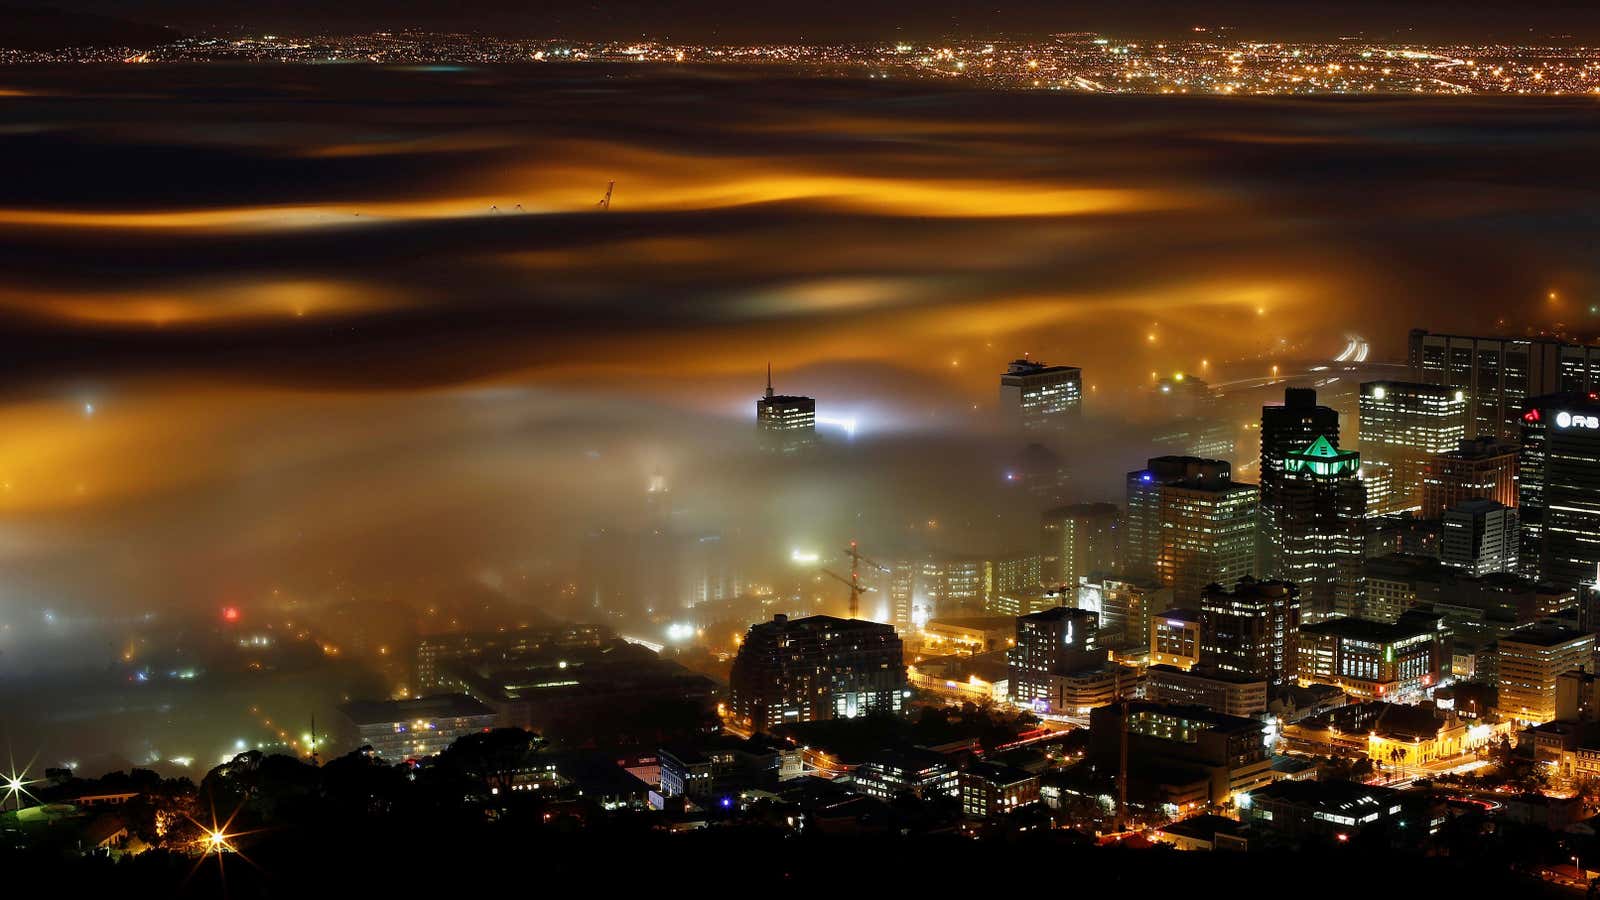 South Africa’s economic outlook is foggy, if not grim.